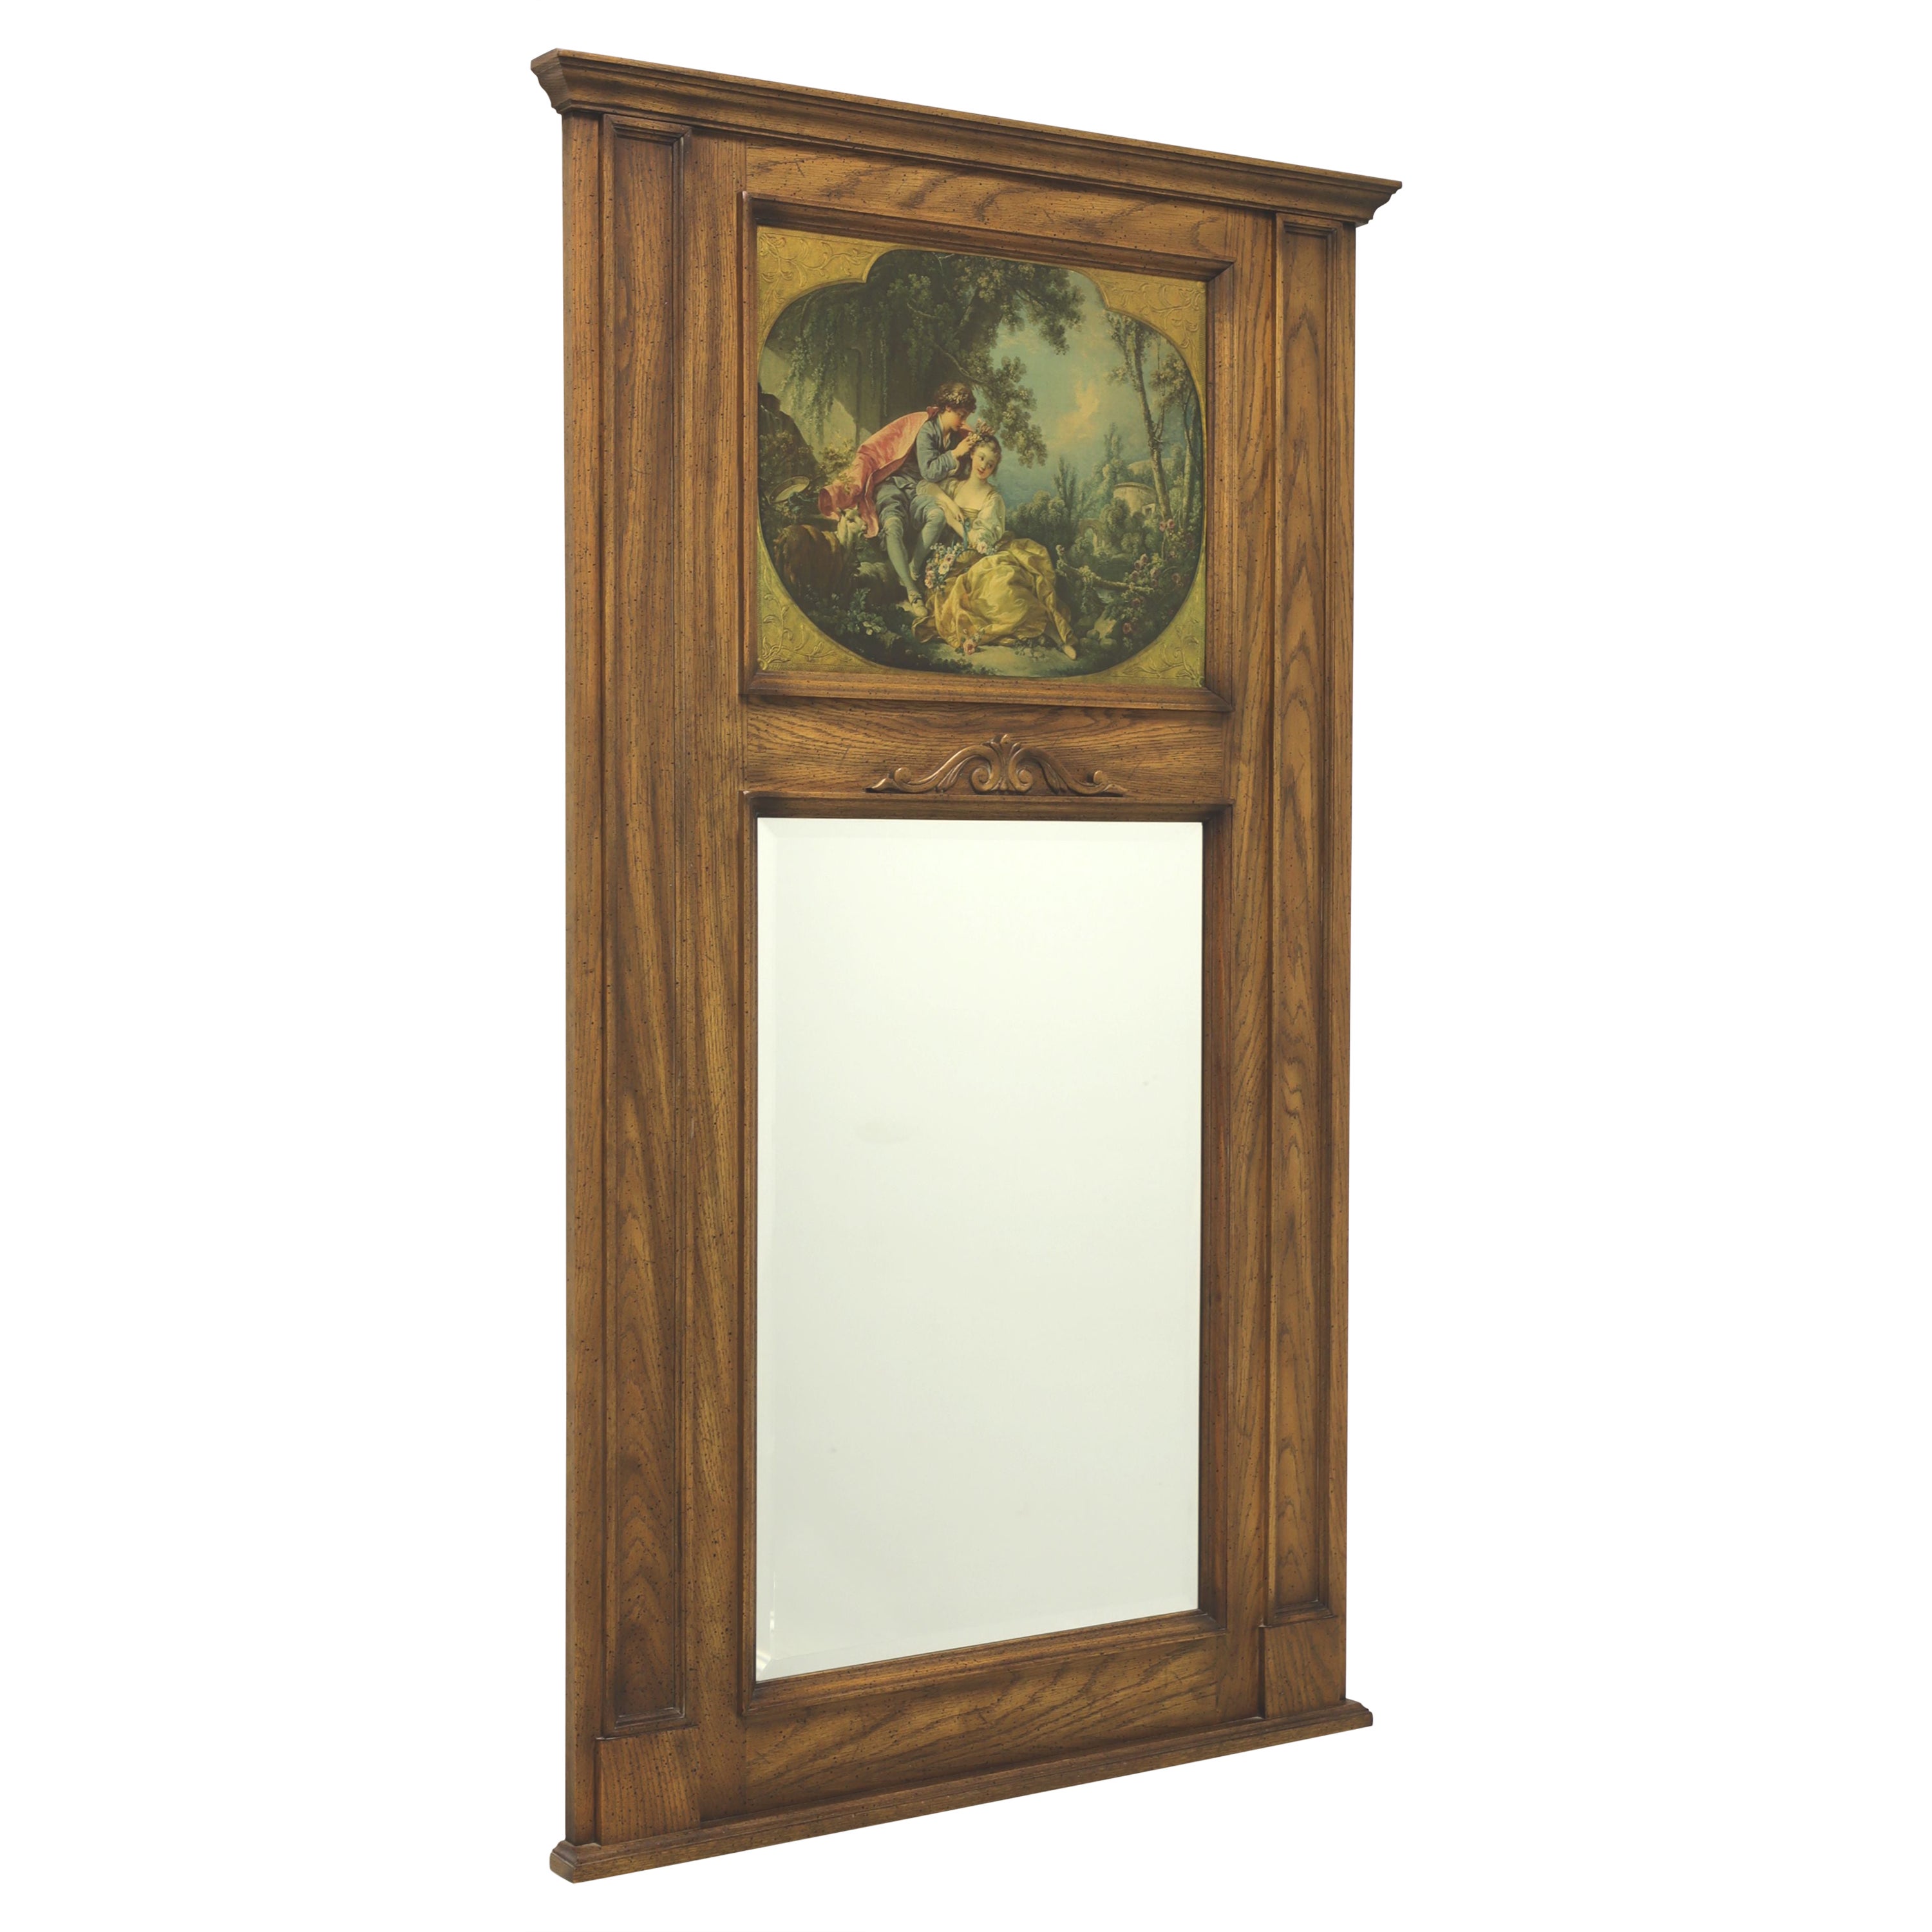 CENTURY FURNITURE Oak French Country Trumeau Monumental Beveled Wall Mirror For Sale